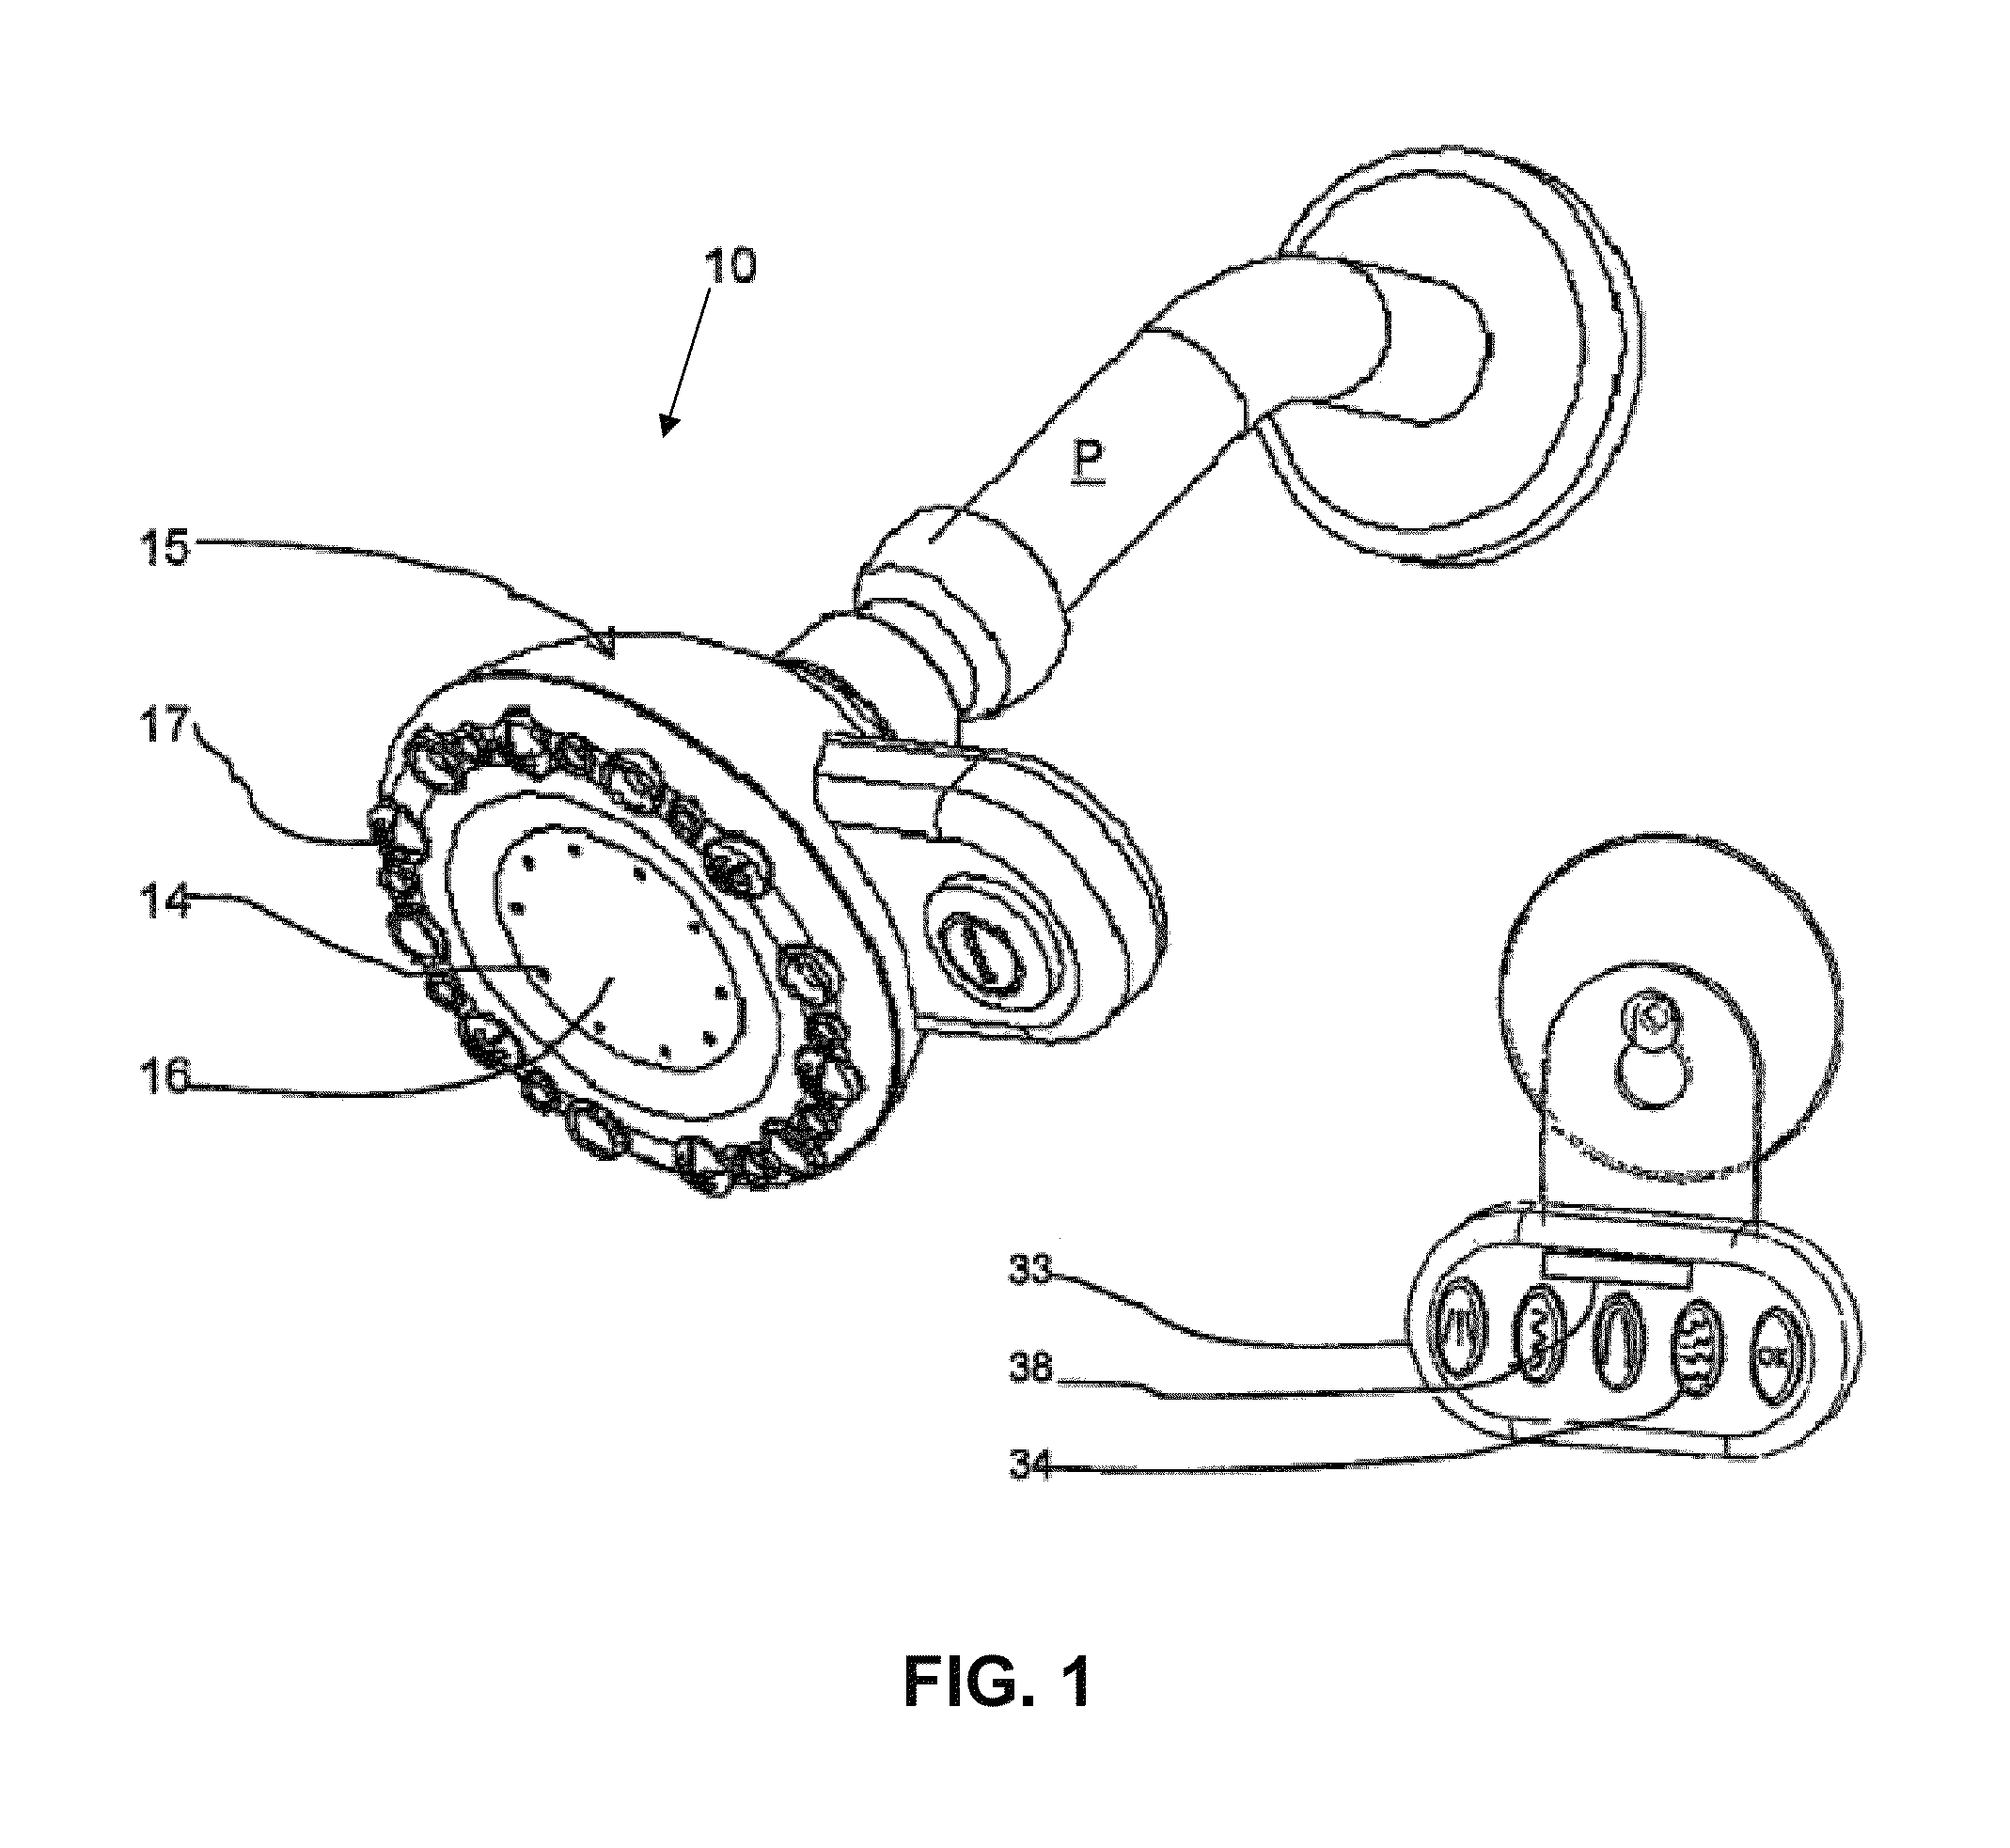 Showerhead with touch based multimodal rechargeable battery operation